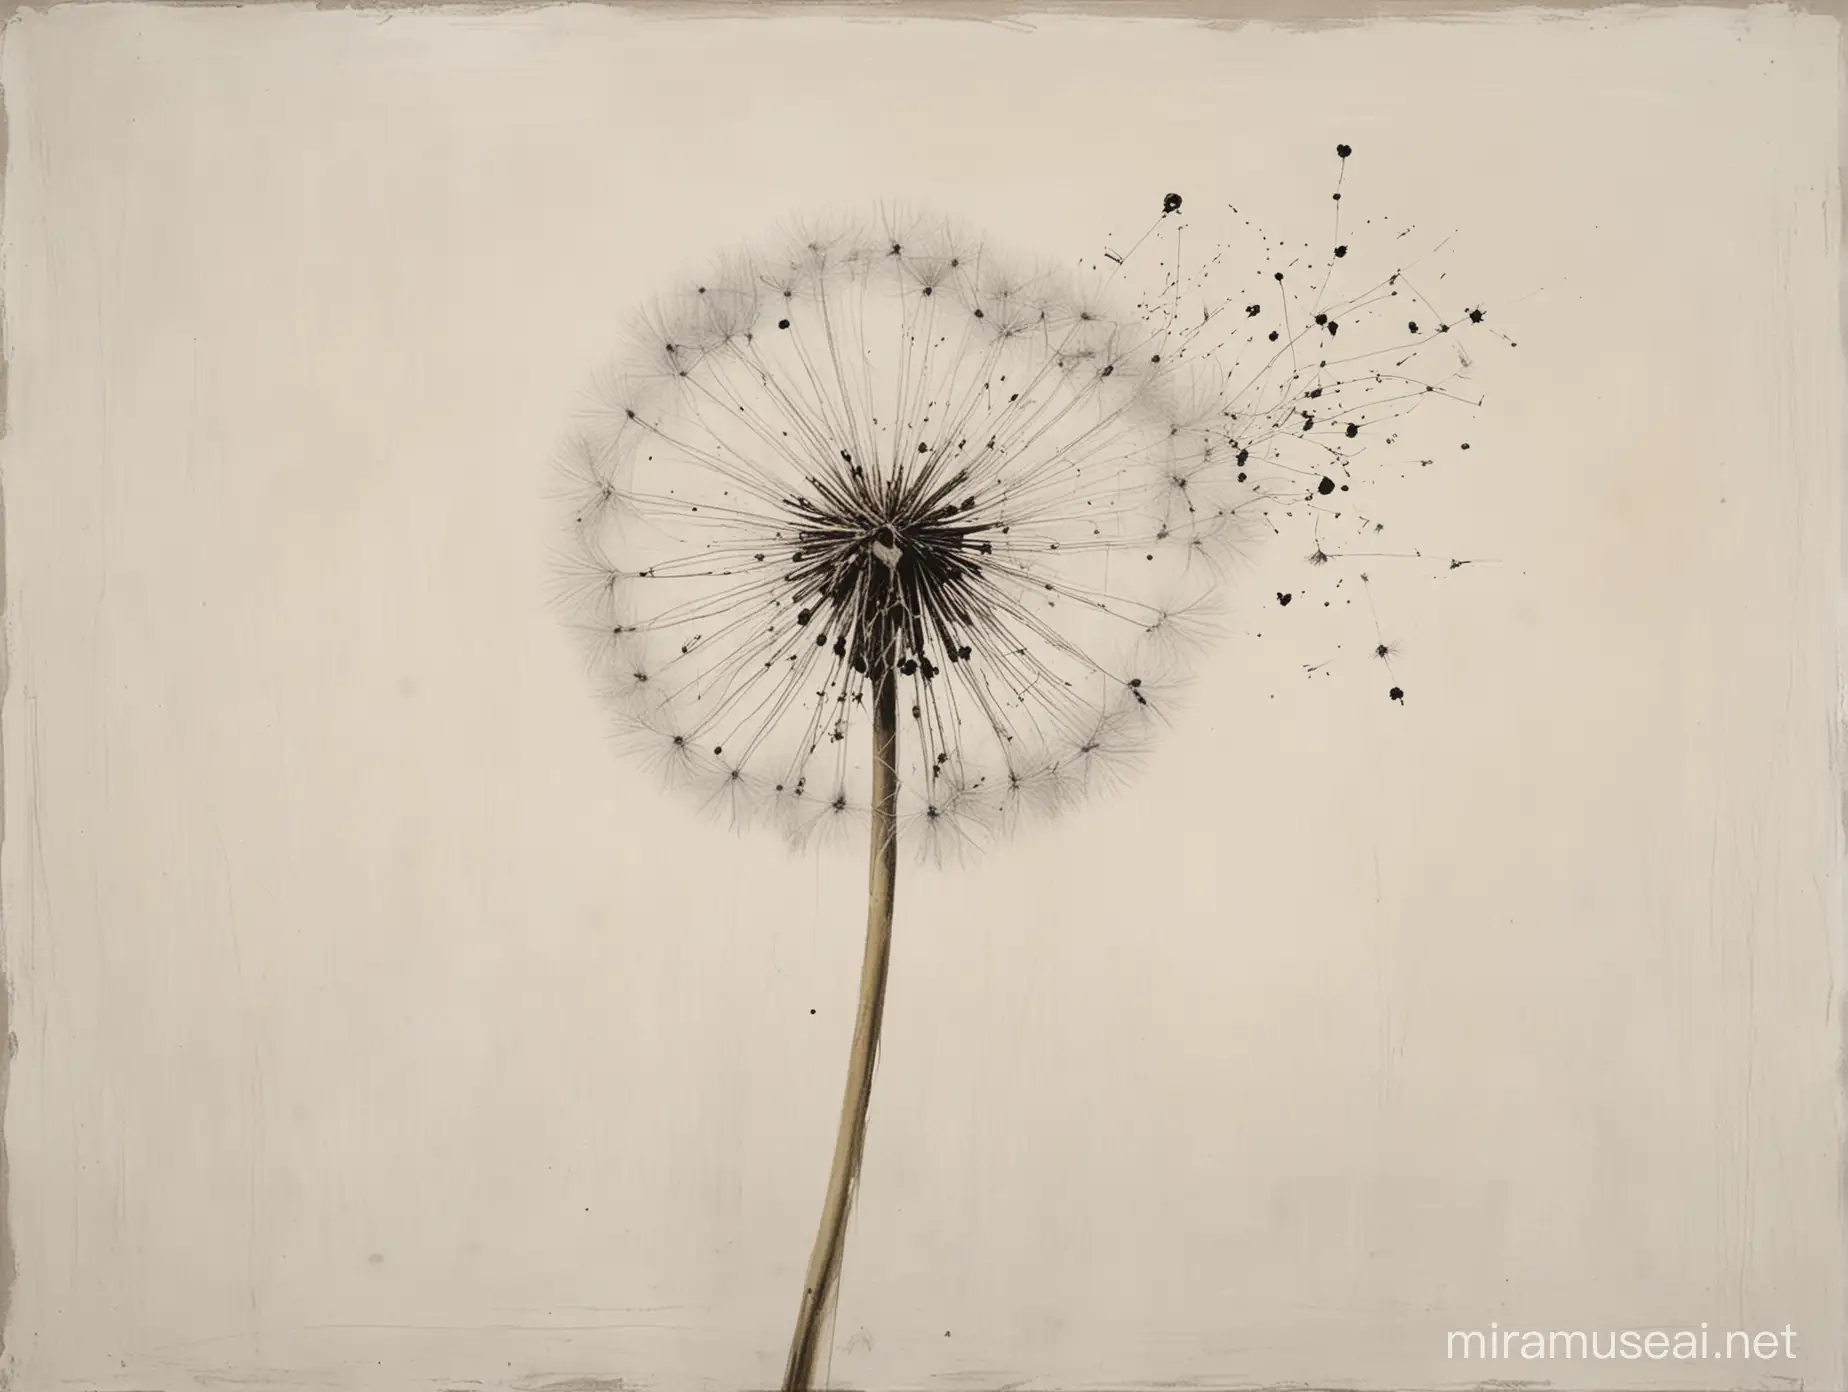 abstract and minimalist painting of a dandelion with seeds blowing in the wind; Abstract art; Oil, Ink; by Mark Rothko, Agnes Martin, and Yoko Ono